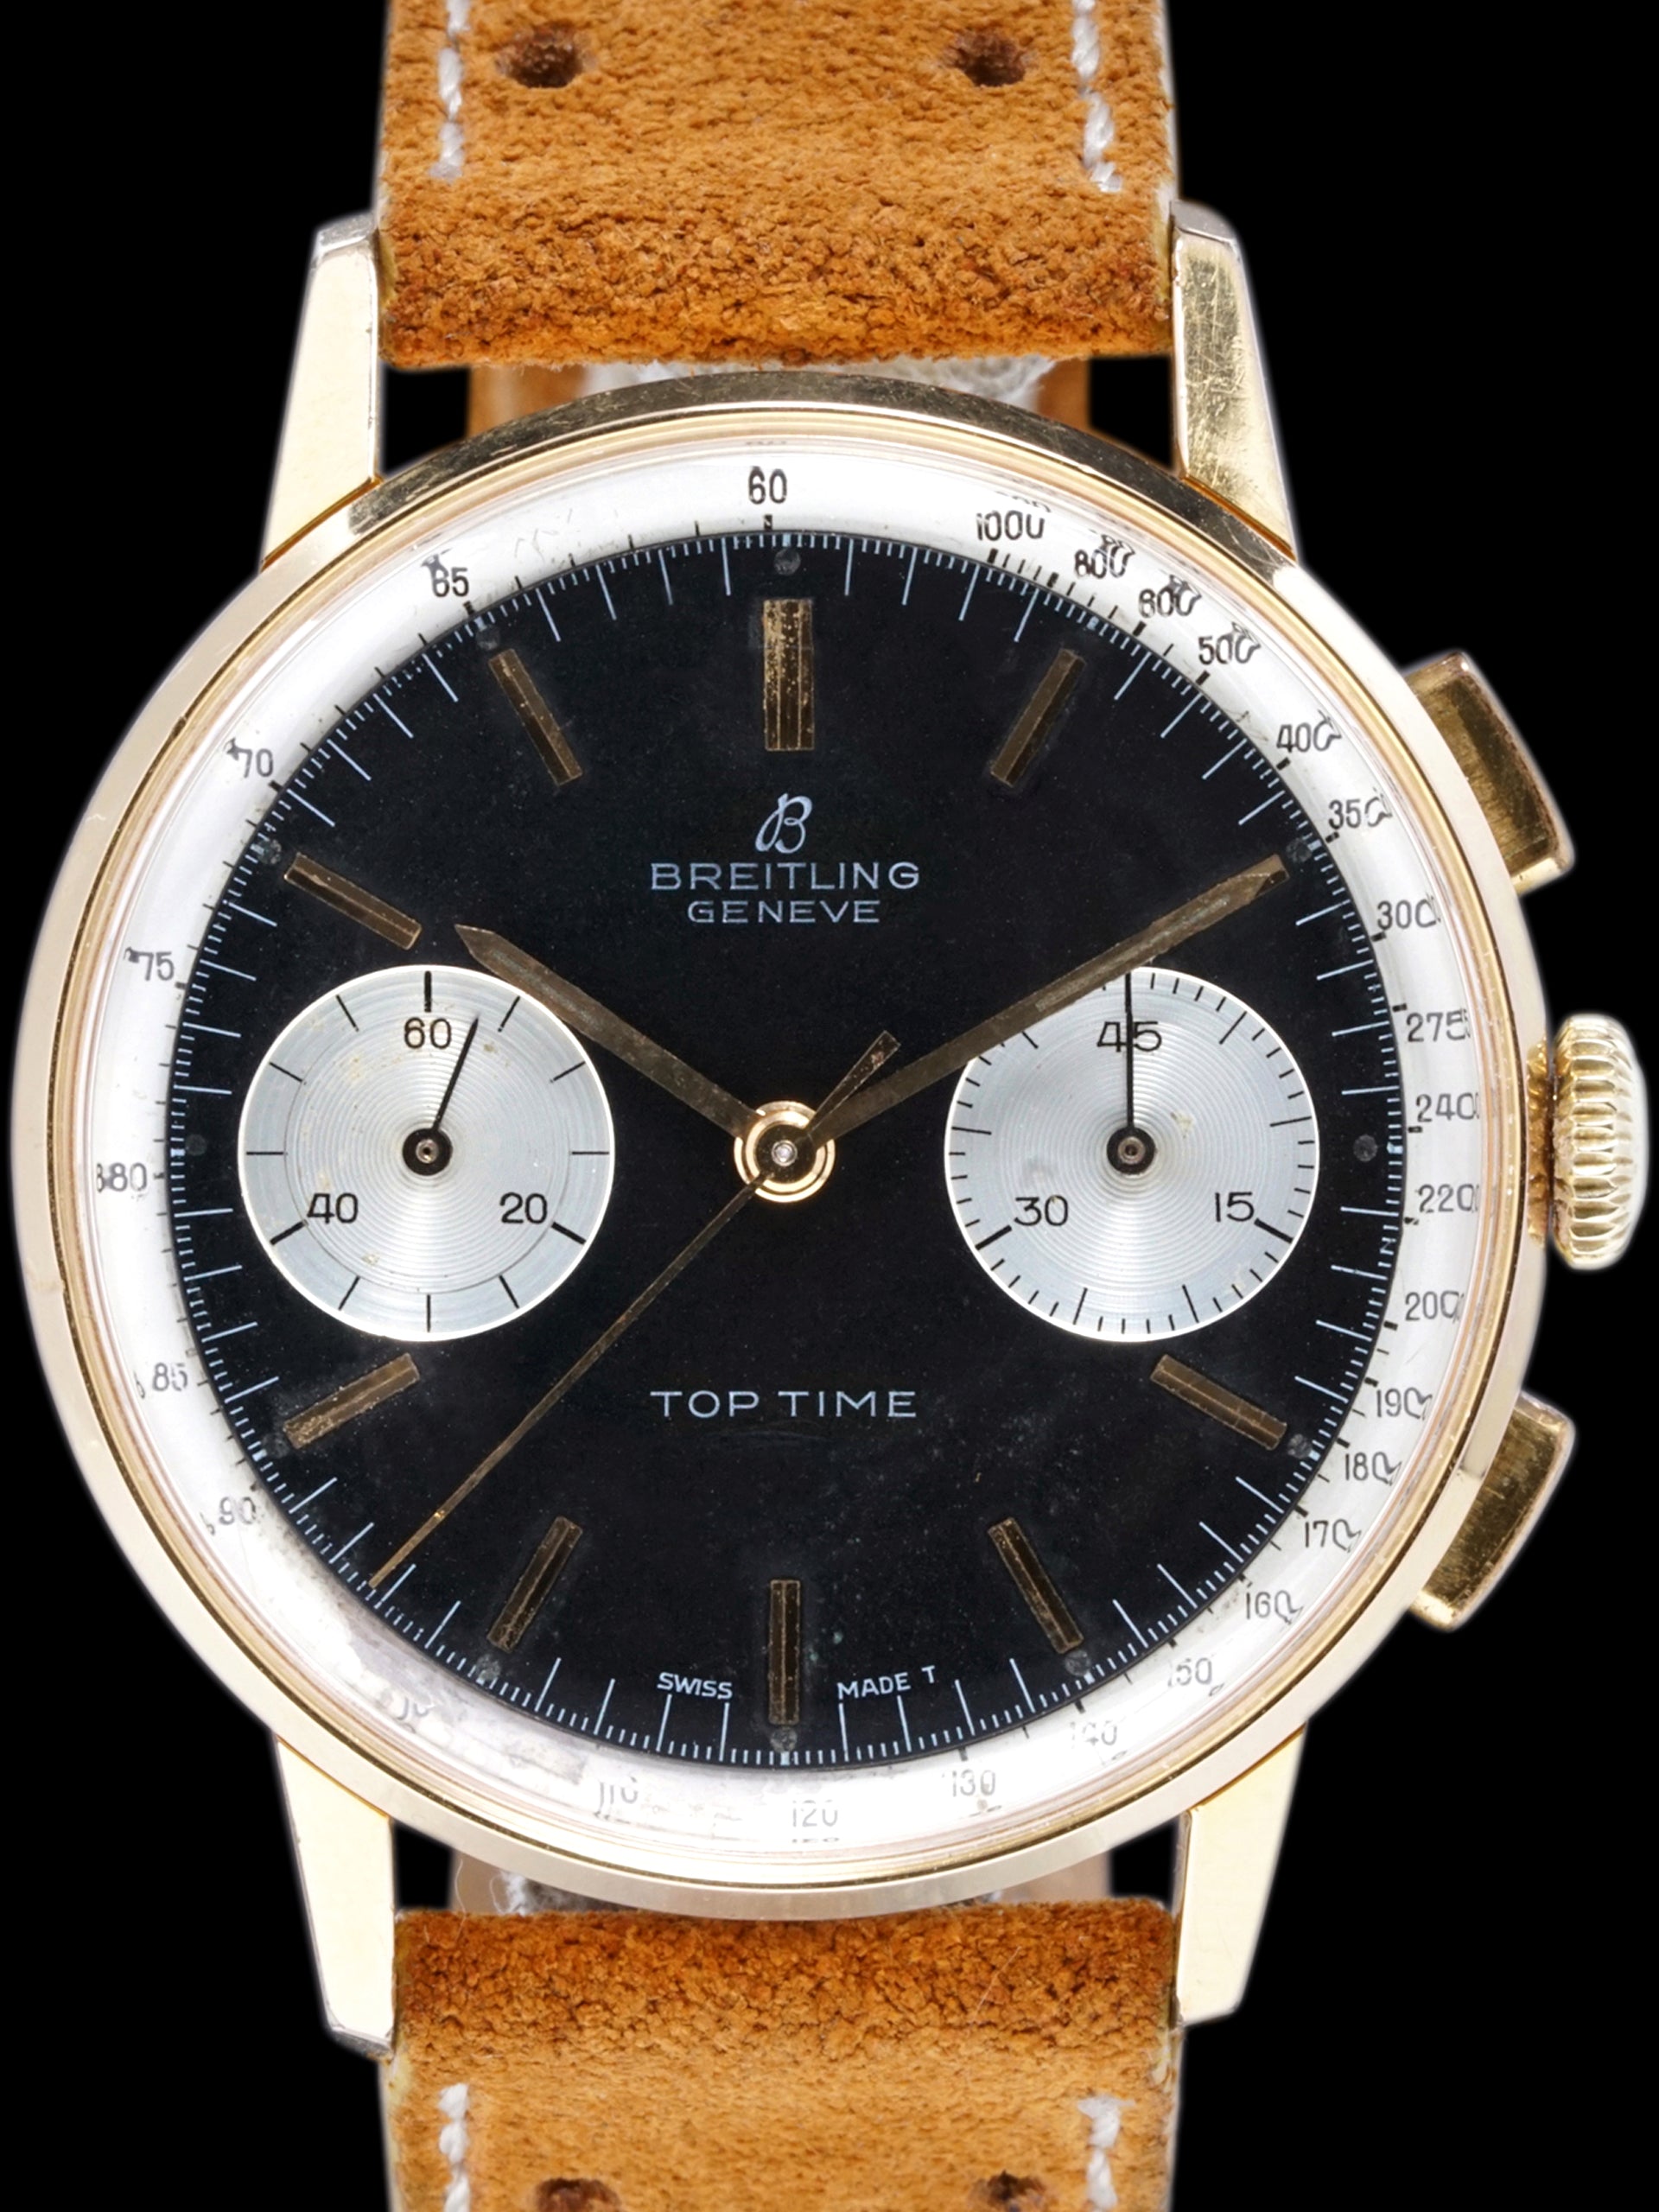 1964 Breitling Top Time Chronograph (Ref. 2000) "Reverse Panda" Gold-Plated